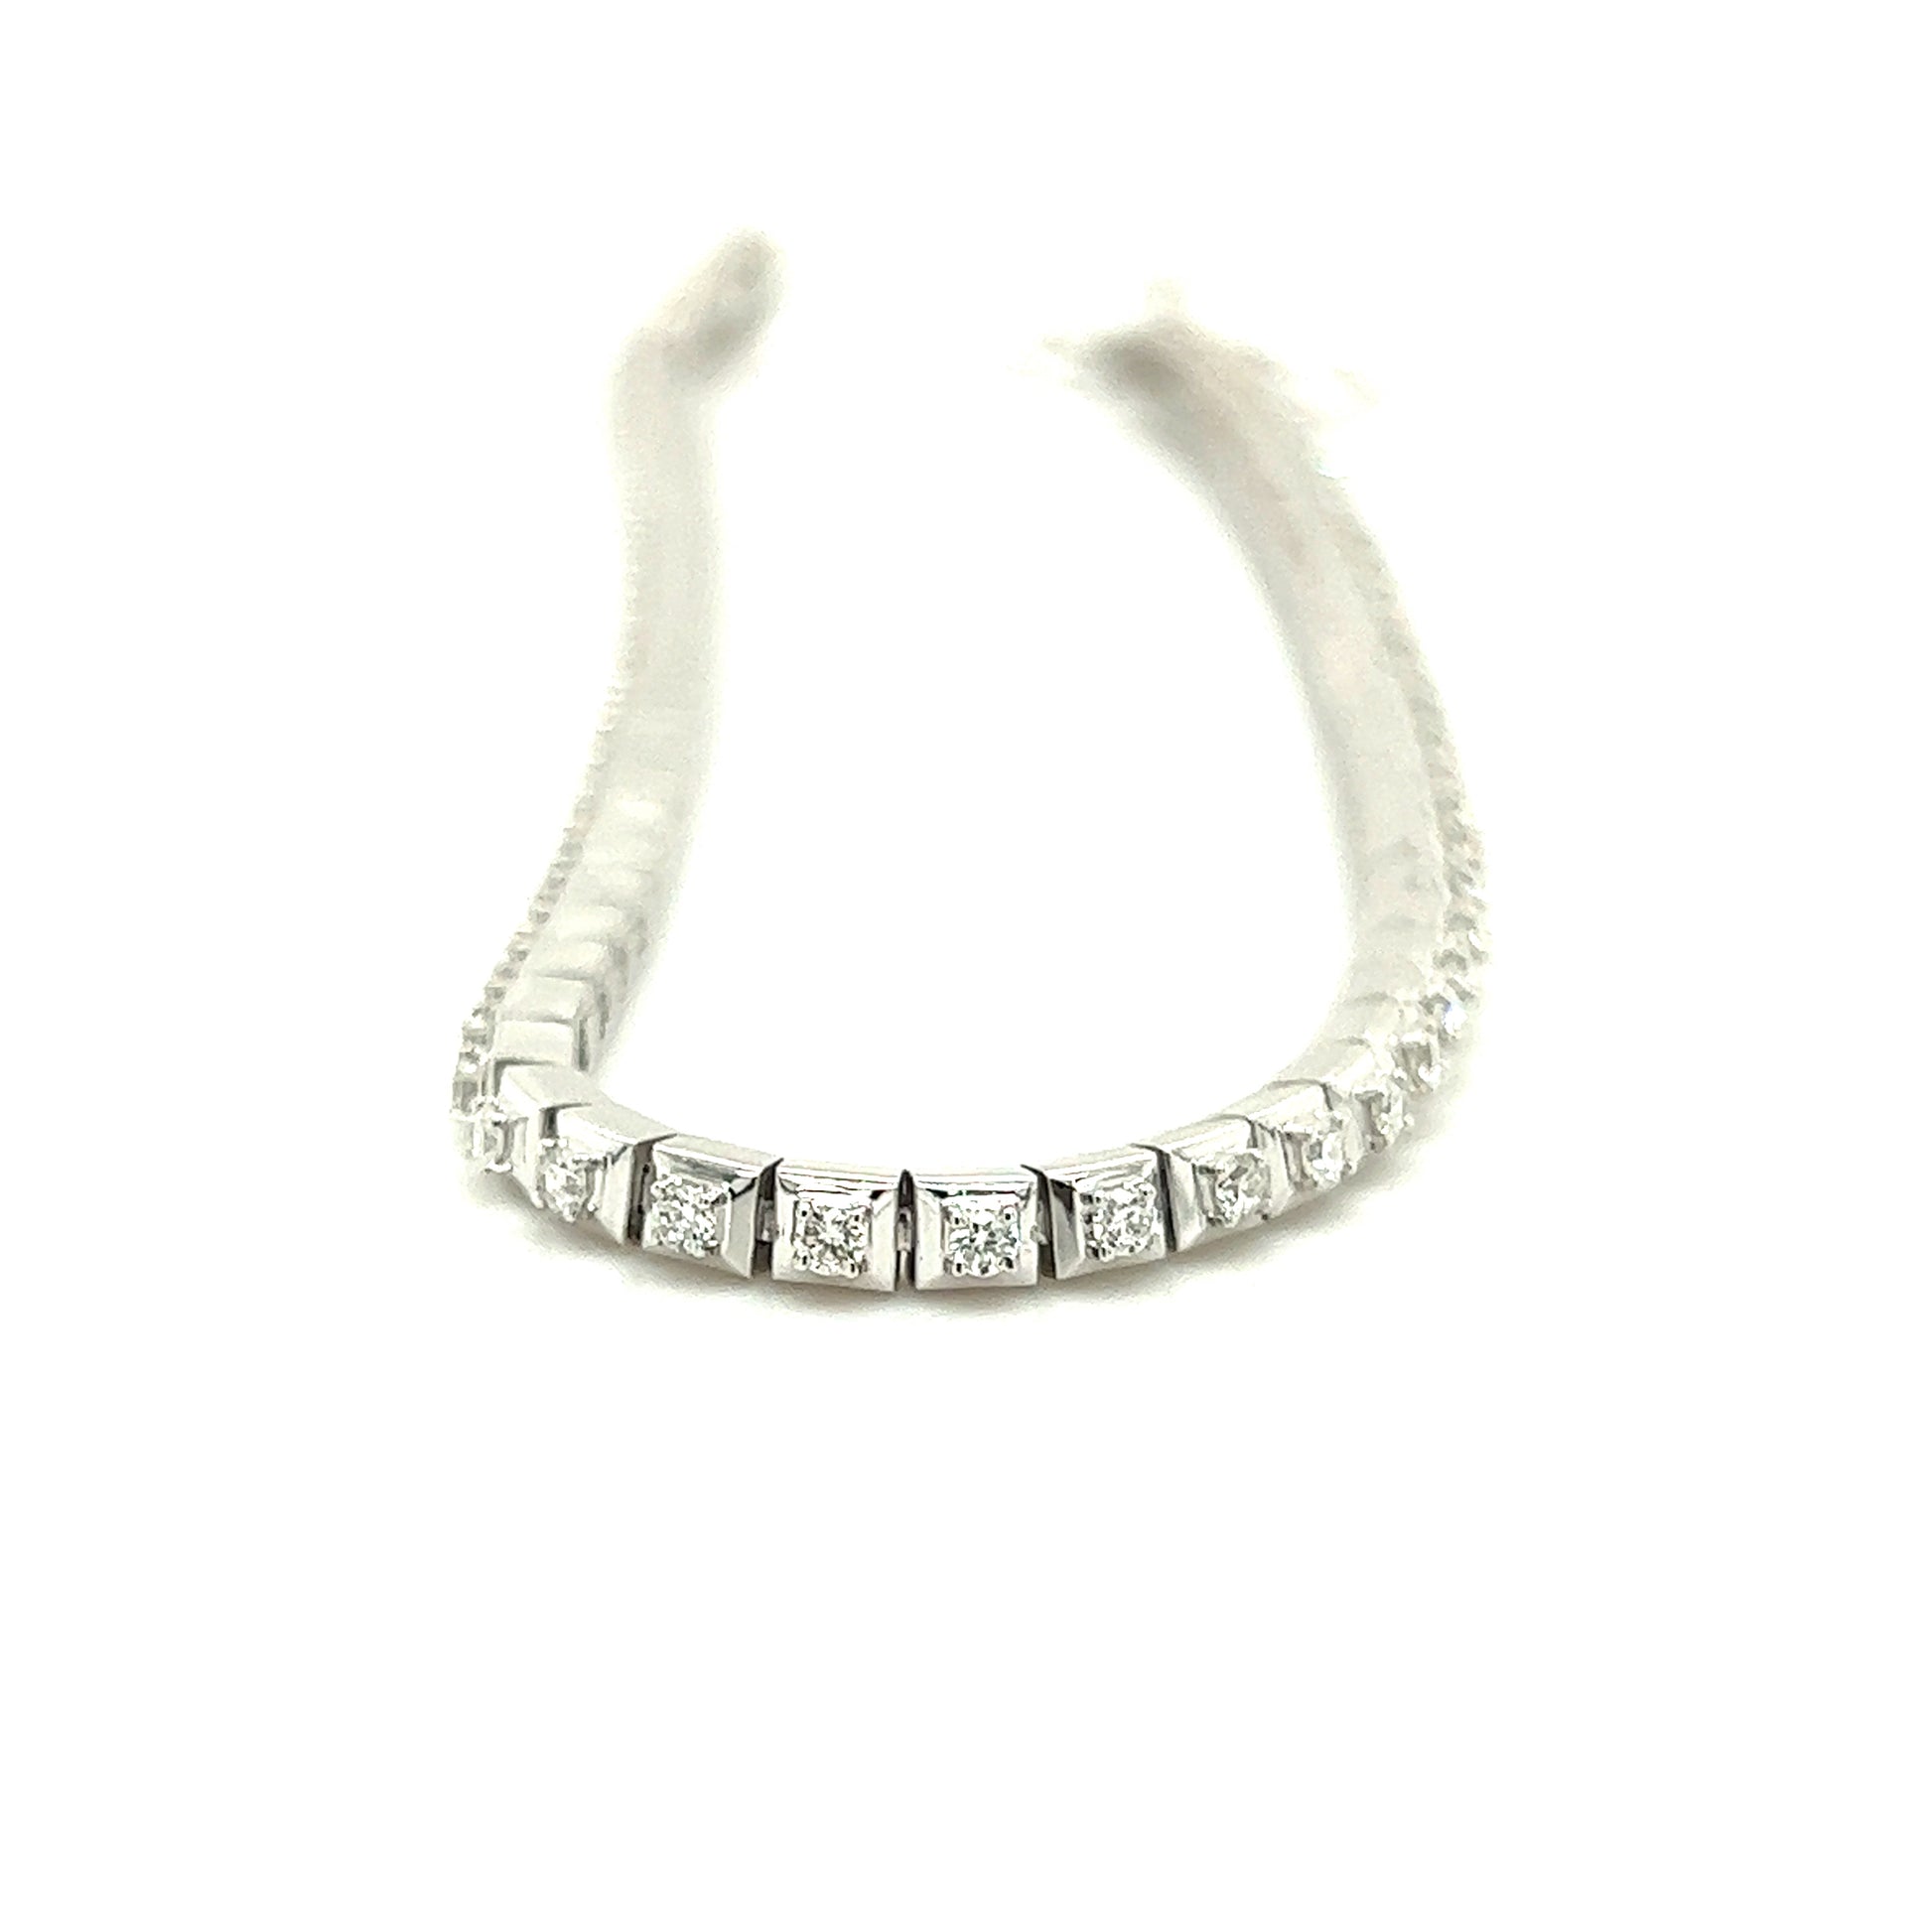 Diamond Link Bracelet with 1.0ctw of Diamonds in 14K White Gold Link and Diamonds Front View